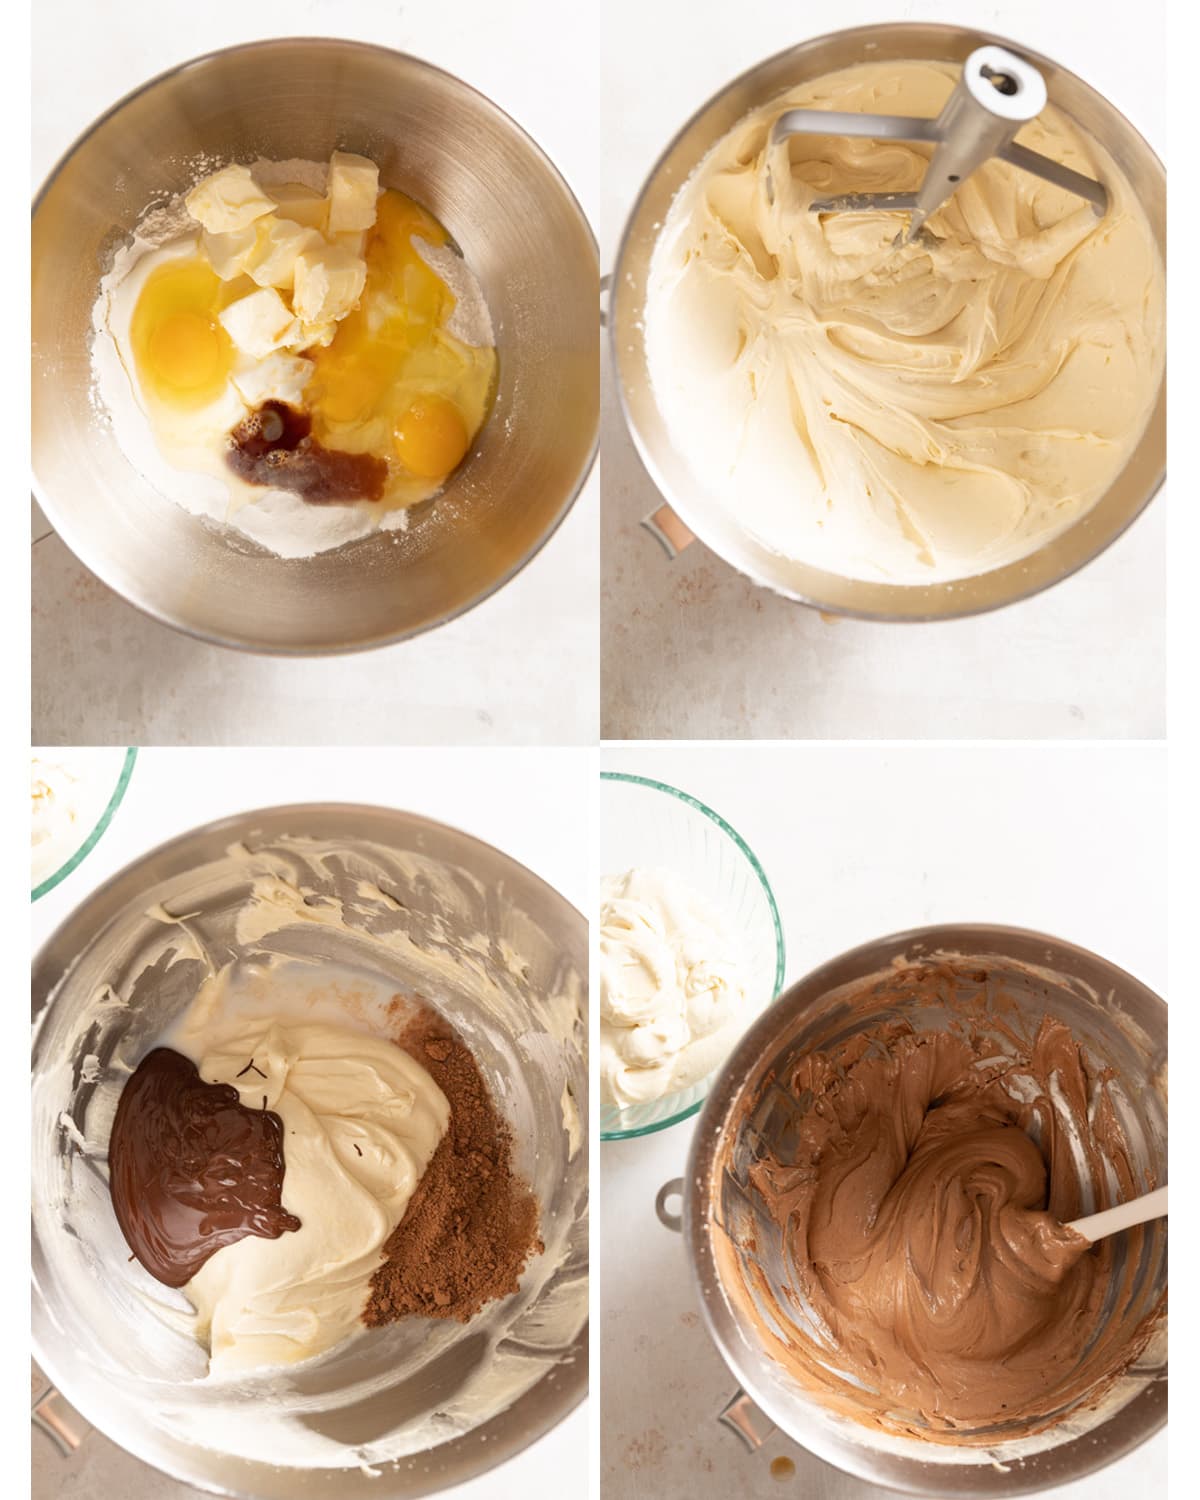 Process showing how to make both the vanilla and chocolate cake batters for a marble cake. 